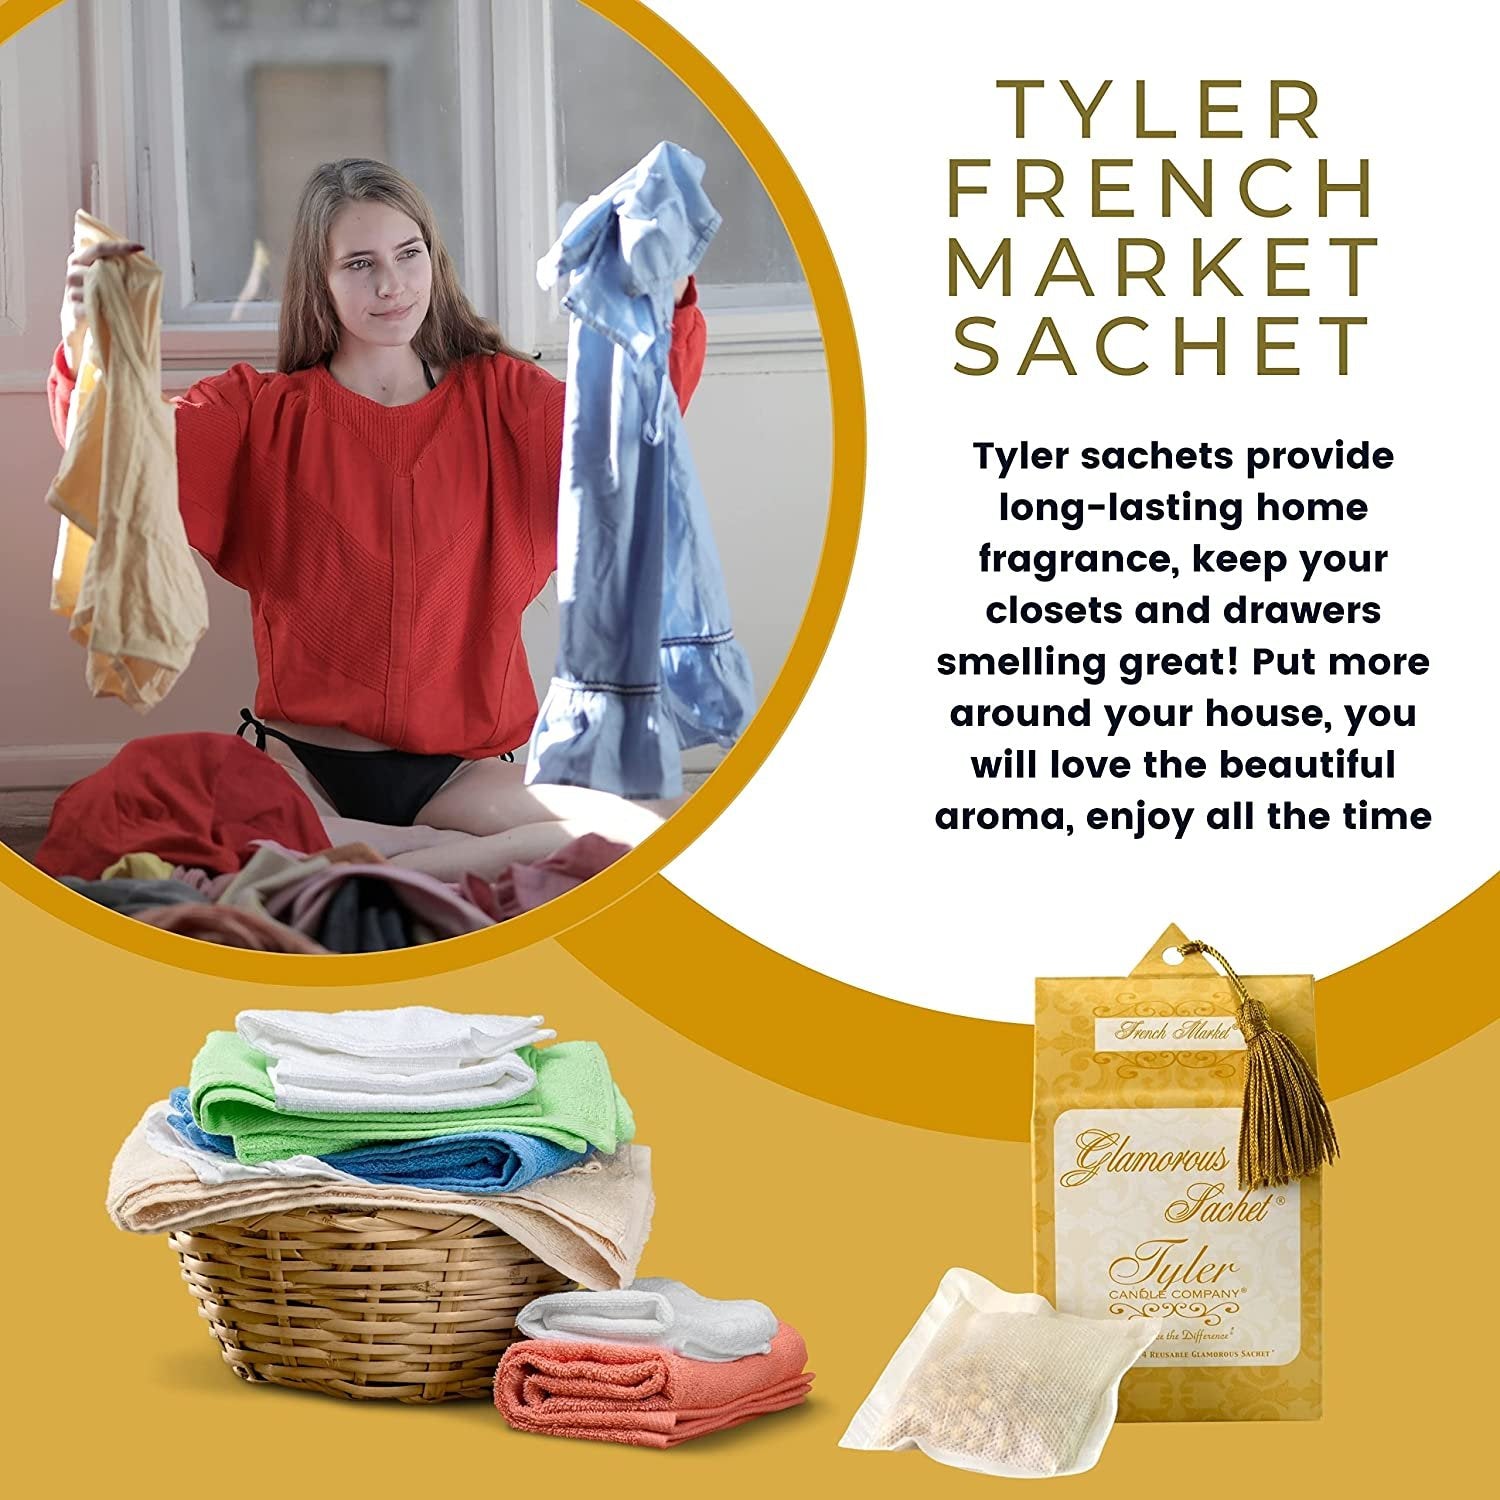 Tyler Candle Company French Market Dryer Sheet Sachets - Glamorous Reusable Dryer Sheets - Sachets for Drawers and Closets - 2 Pack of 4 Sachets, Dryer, Home, or Personal Sachet, with Bonus Key Chain